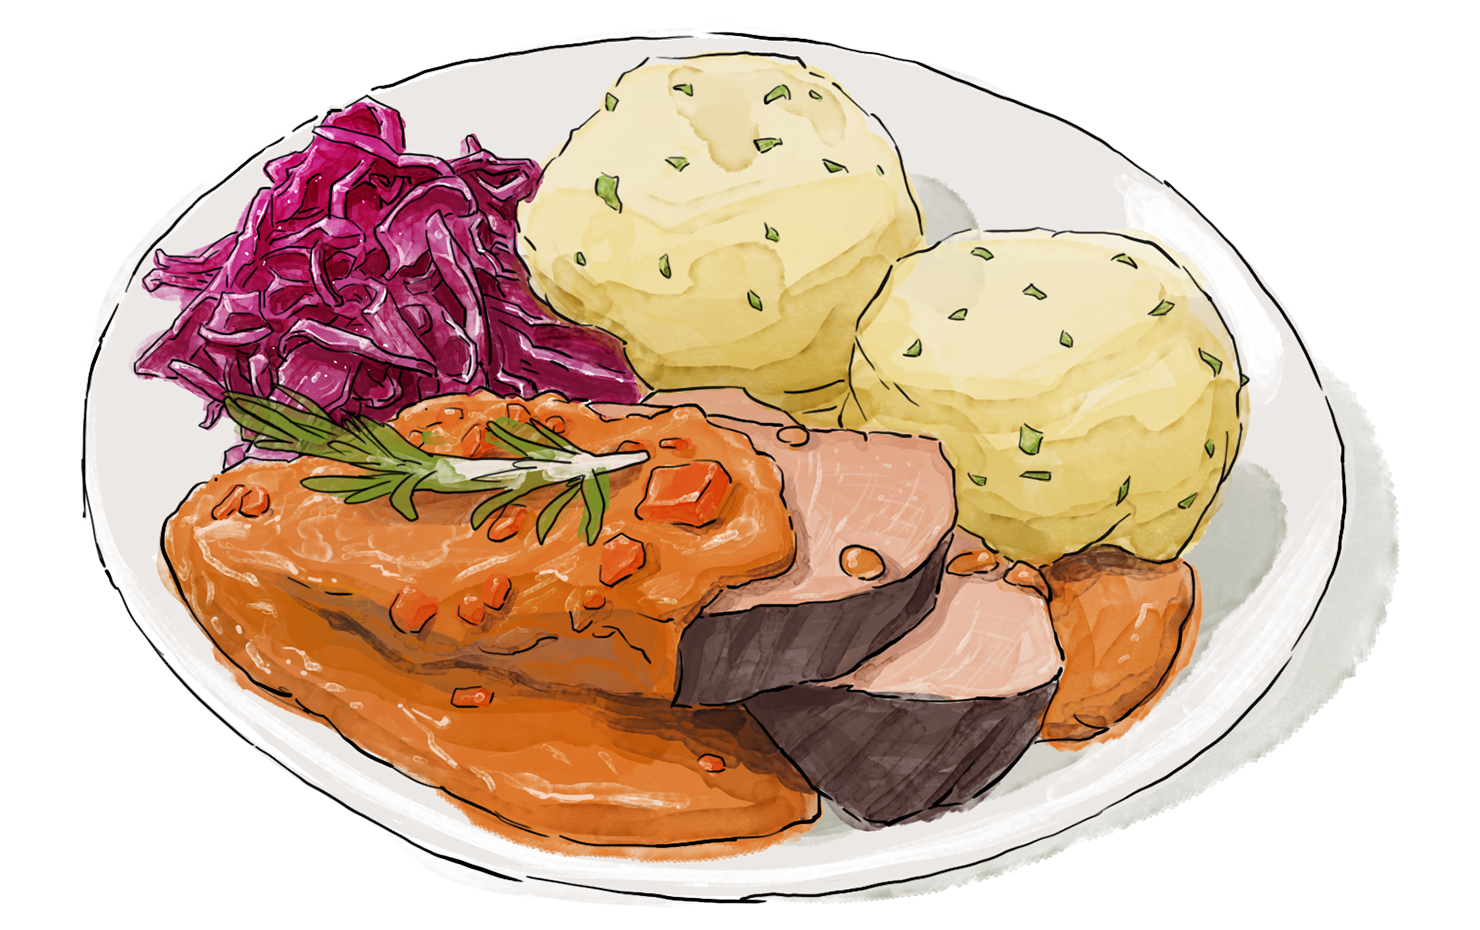 Illustration of a plate of Sauerbraten